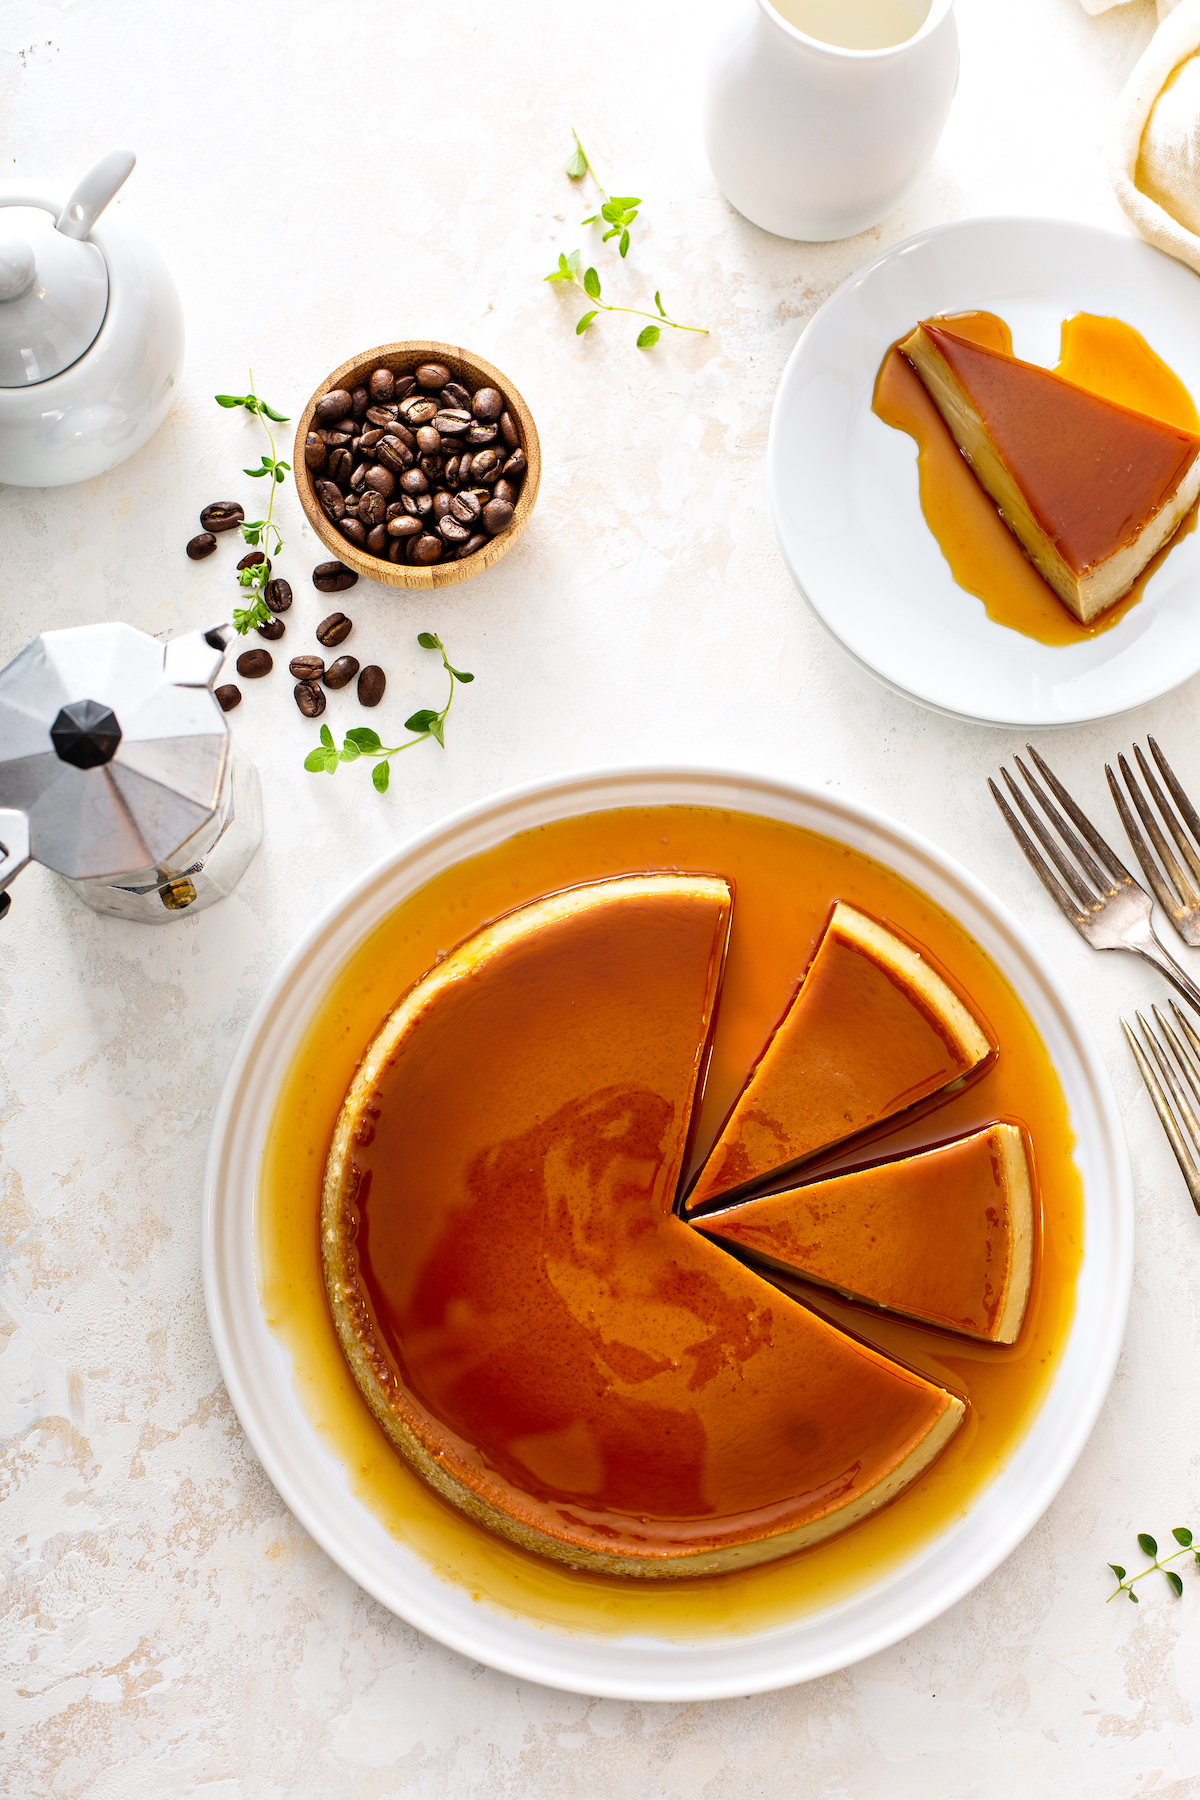 A slice of coffee flan on a white plate and an entire flan on a large white serving platter with coffee beans around.